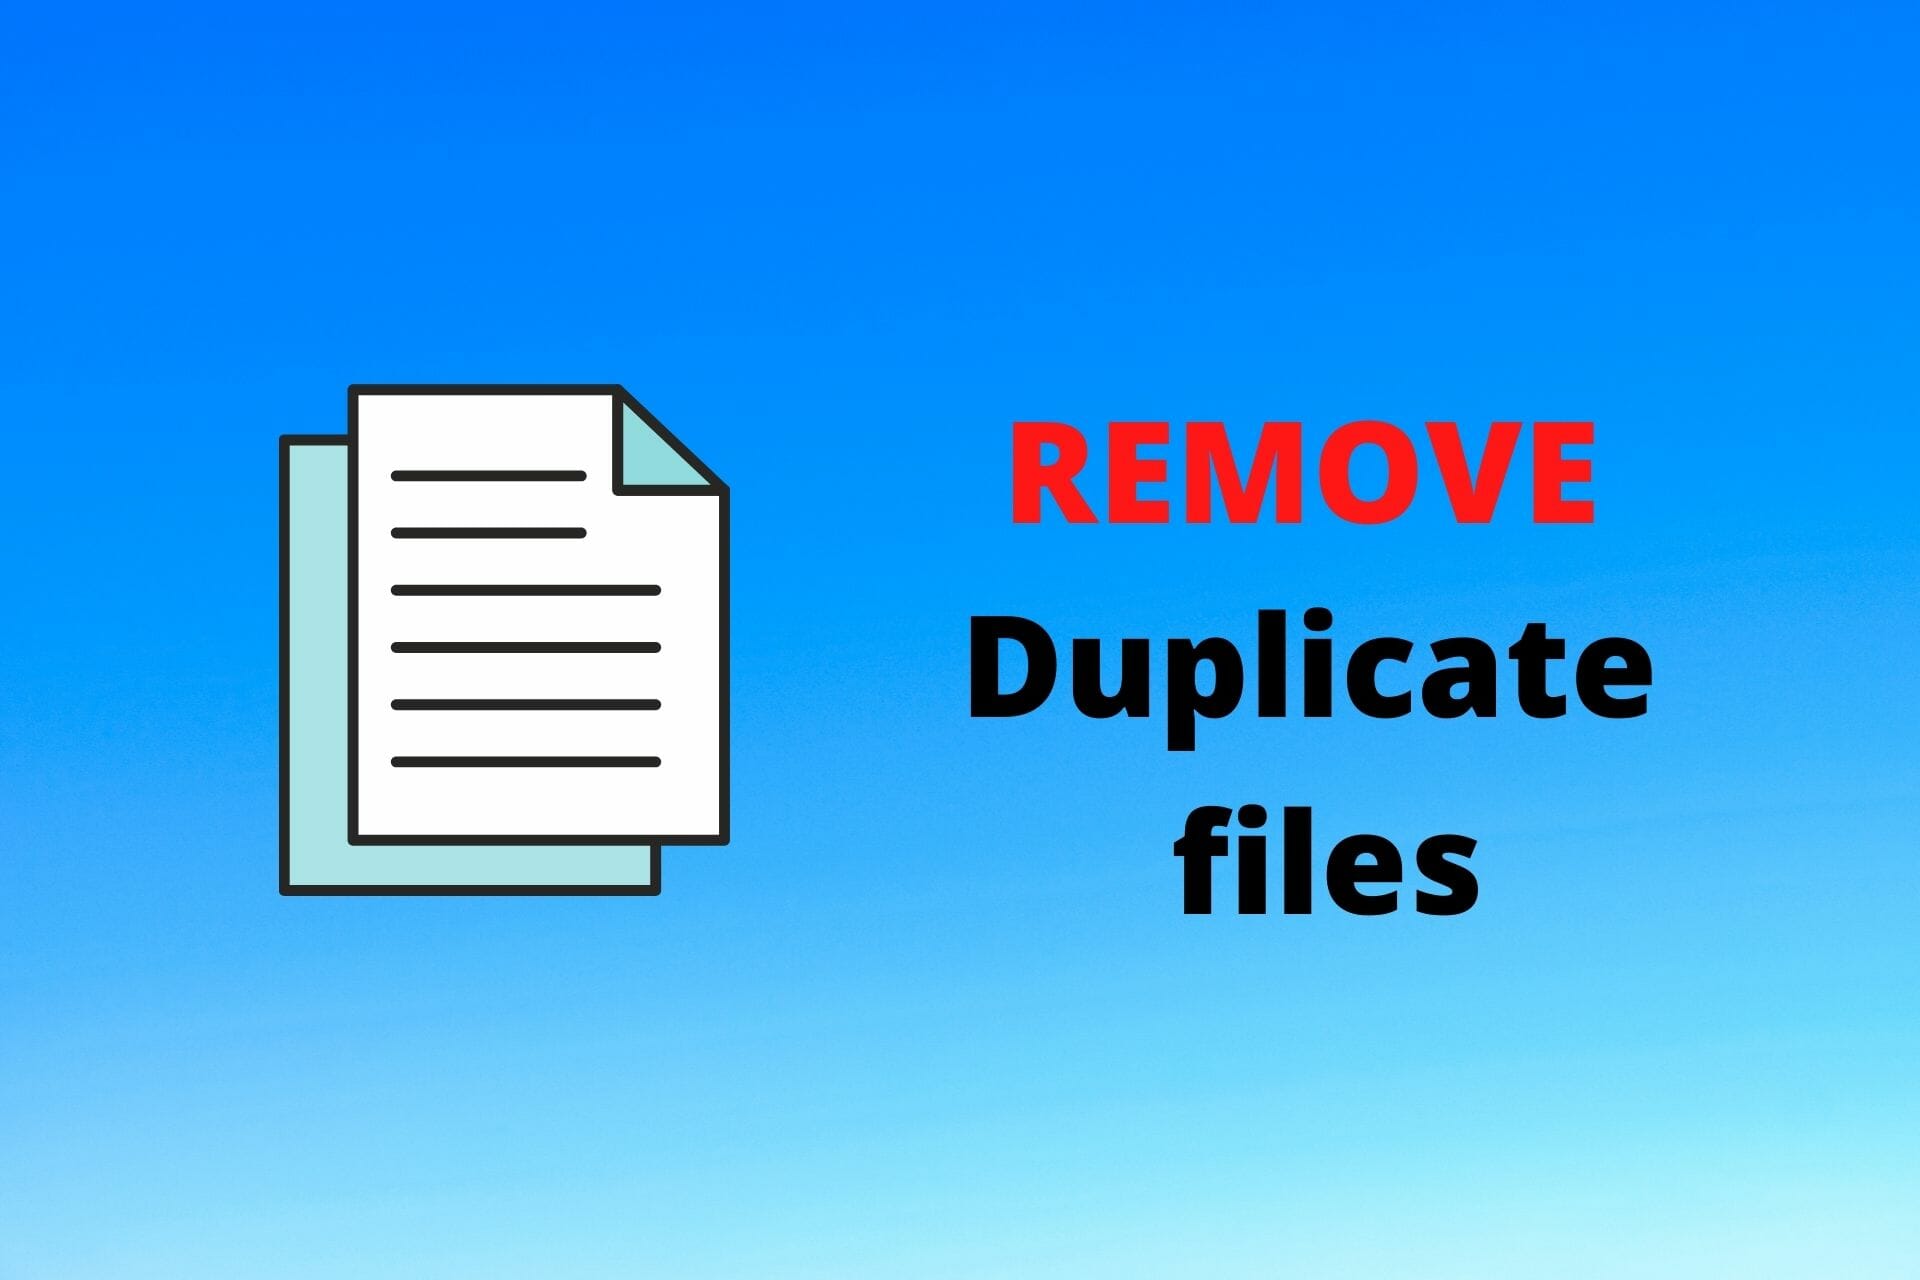 How To Remove Duplicate Files In Windows 10 Step By Step - hide duplicates in roblox catalog